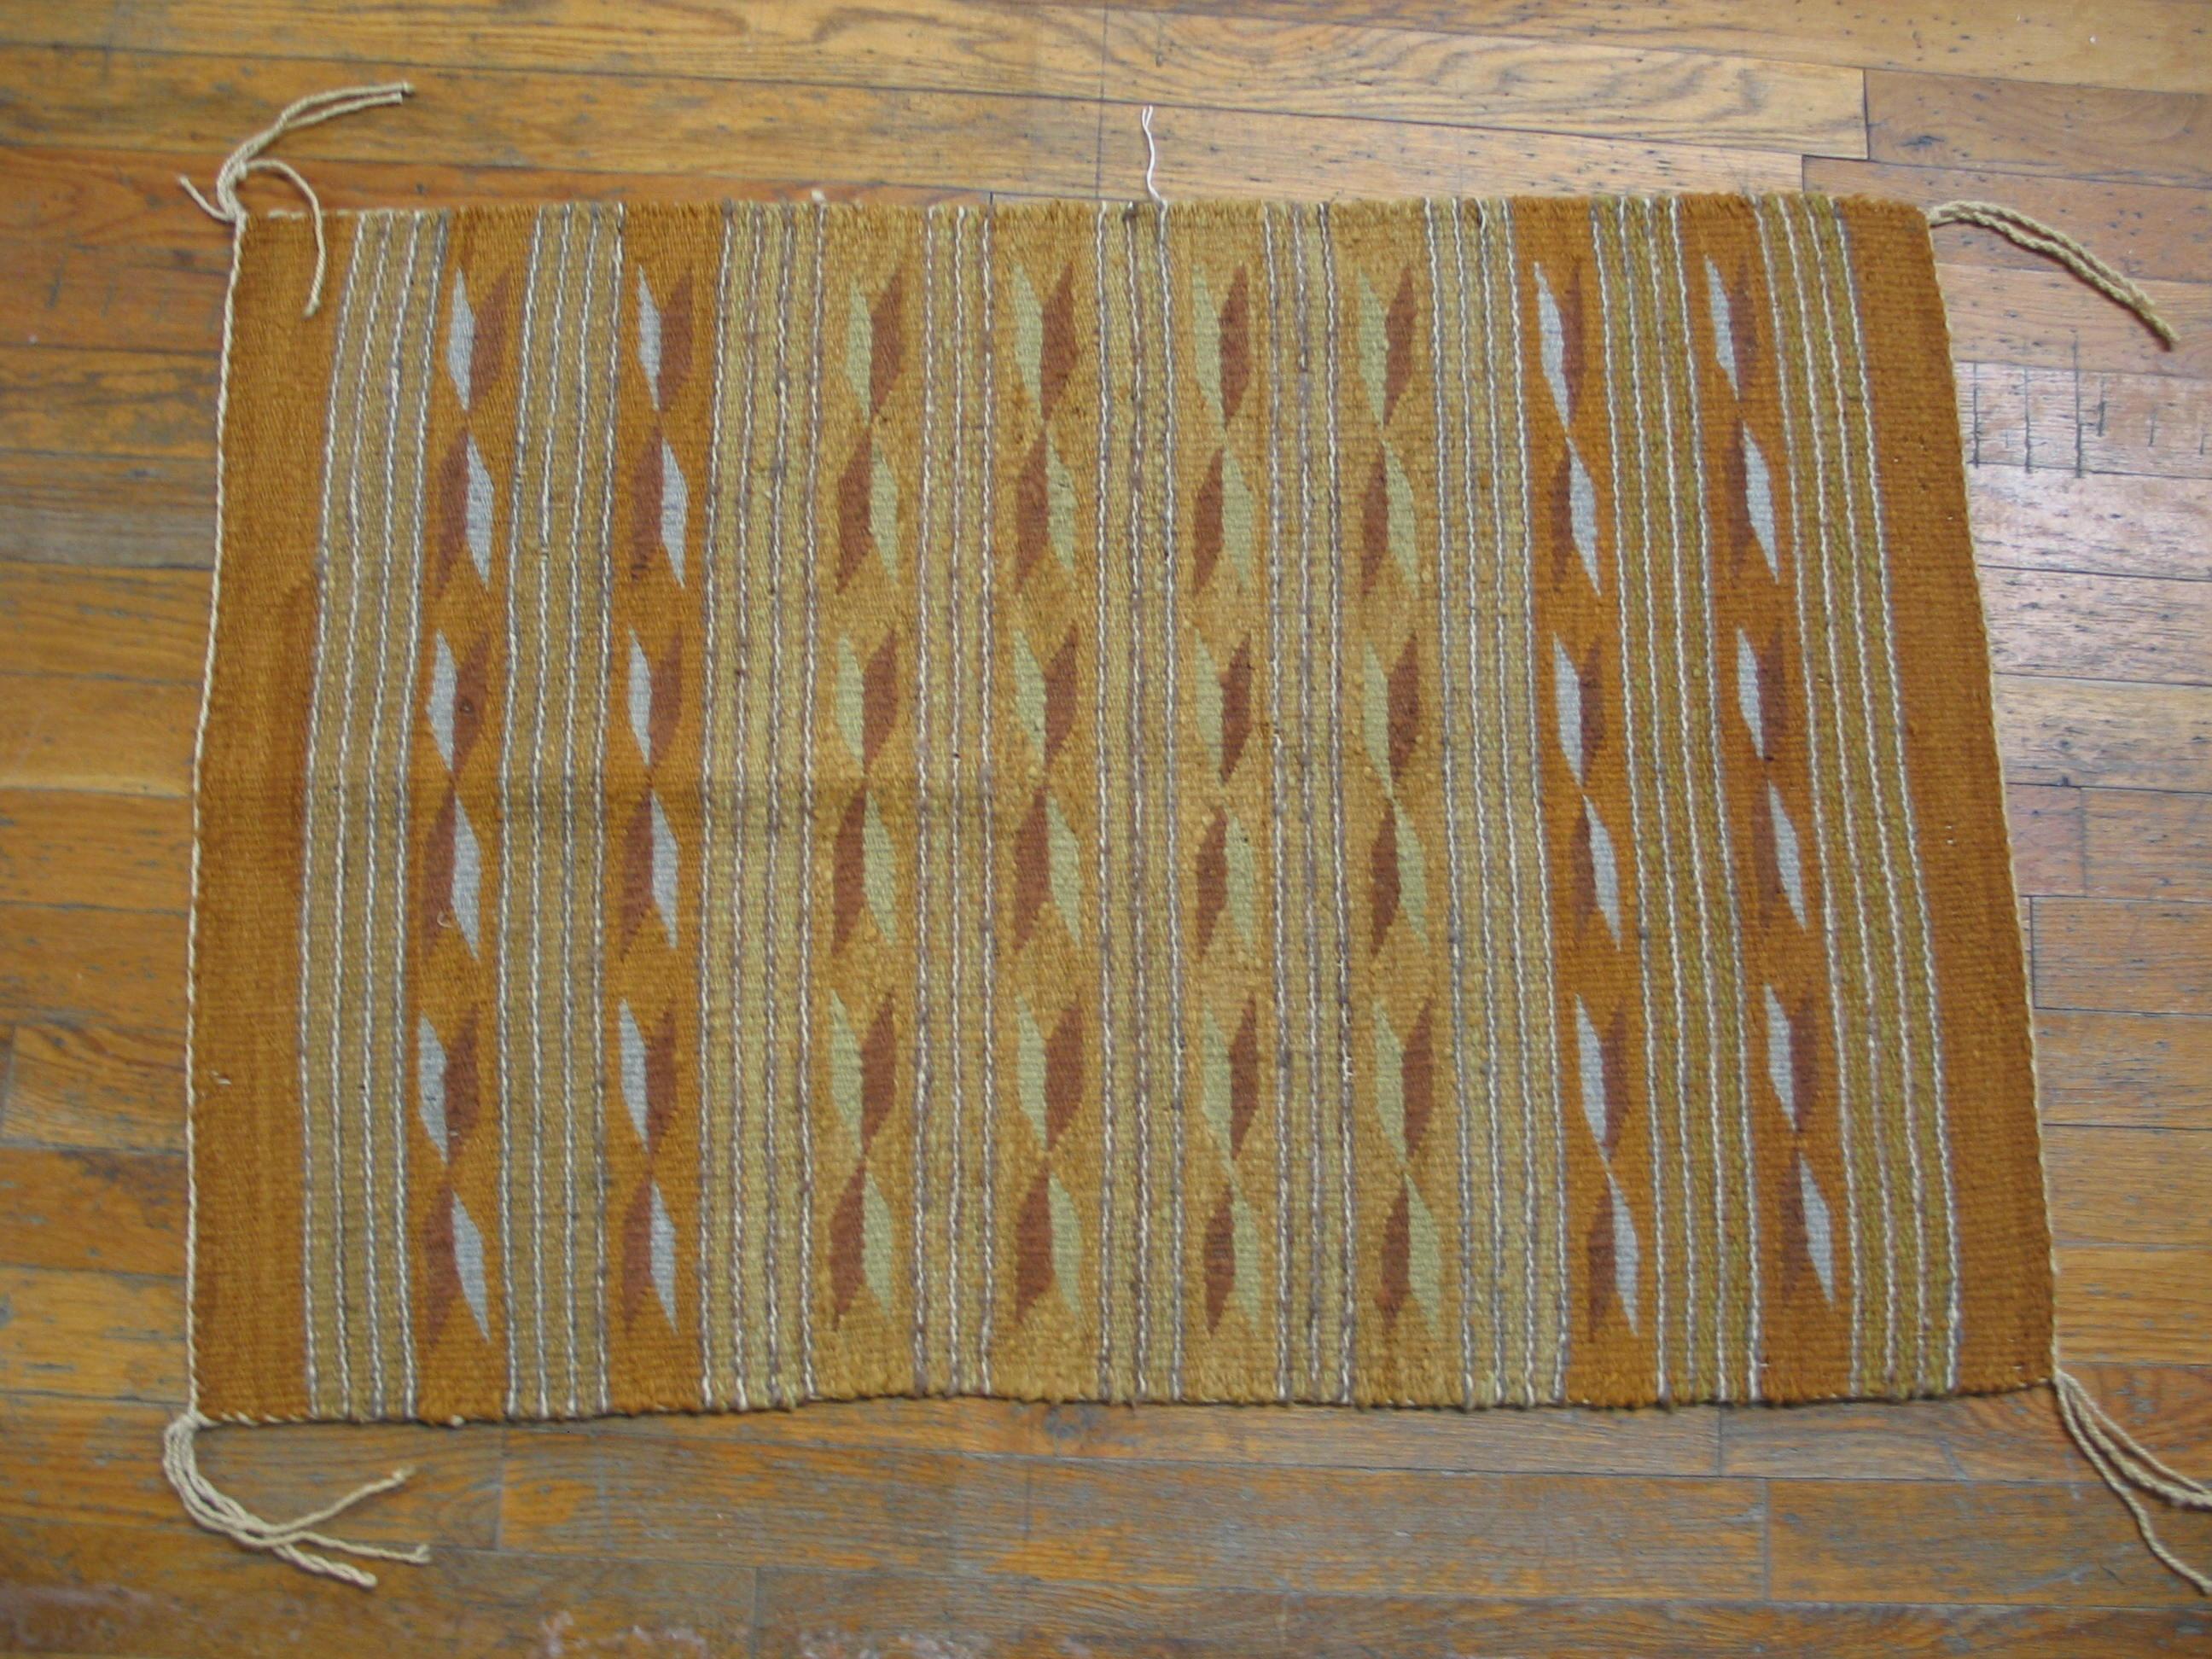 This Chinle-style mini-blanket / ruglet shows an eight band pattern of rust and straw and ivory feathery bows with quadruple lines separating them. Makes a good pillow. Good condition. 